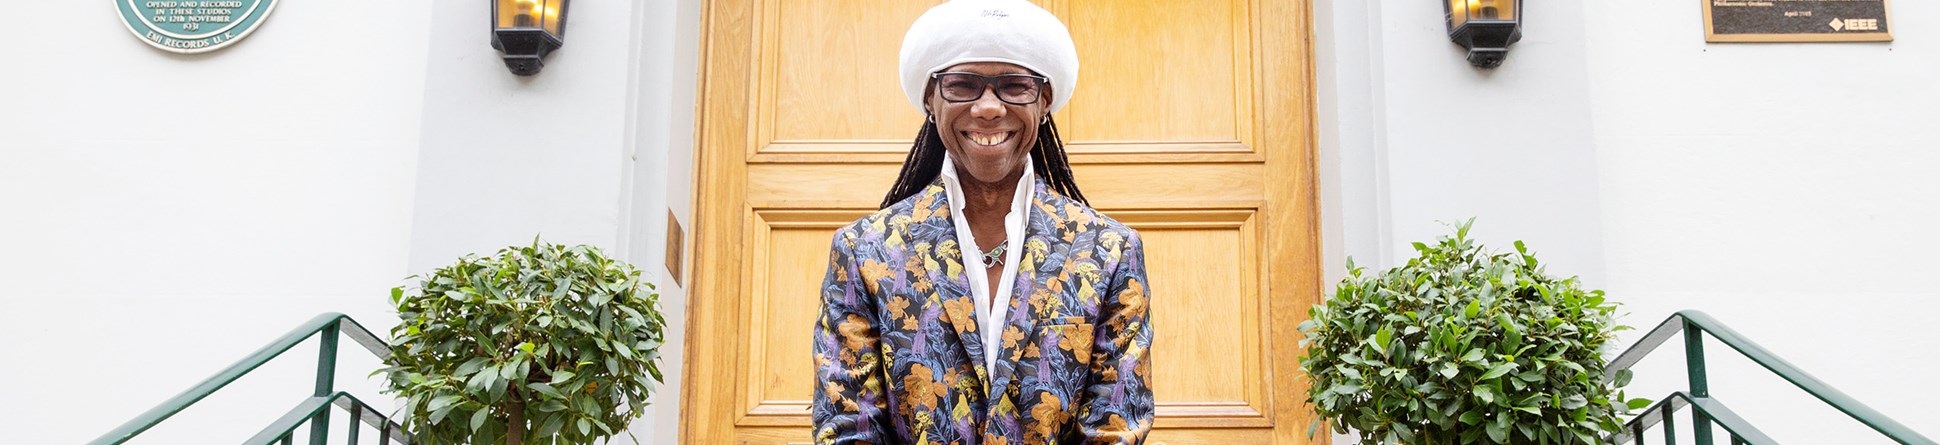 Nile Rodgers, Music Legend, at the Abbey Road Studios in London